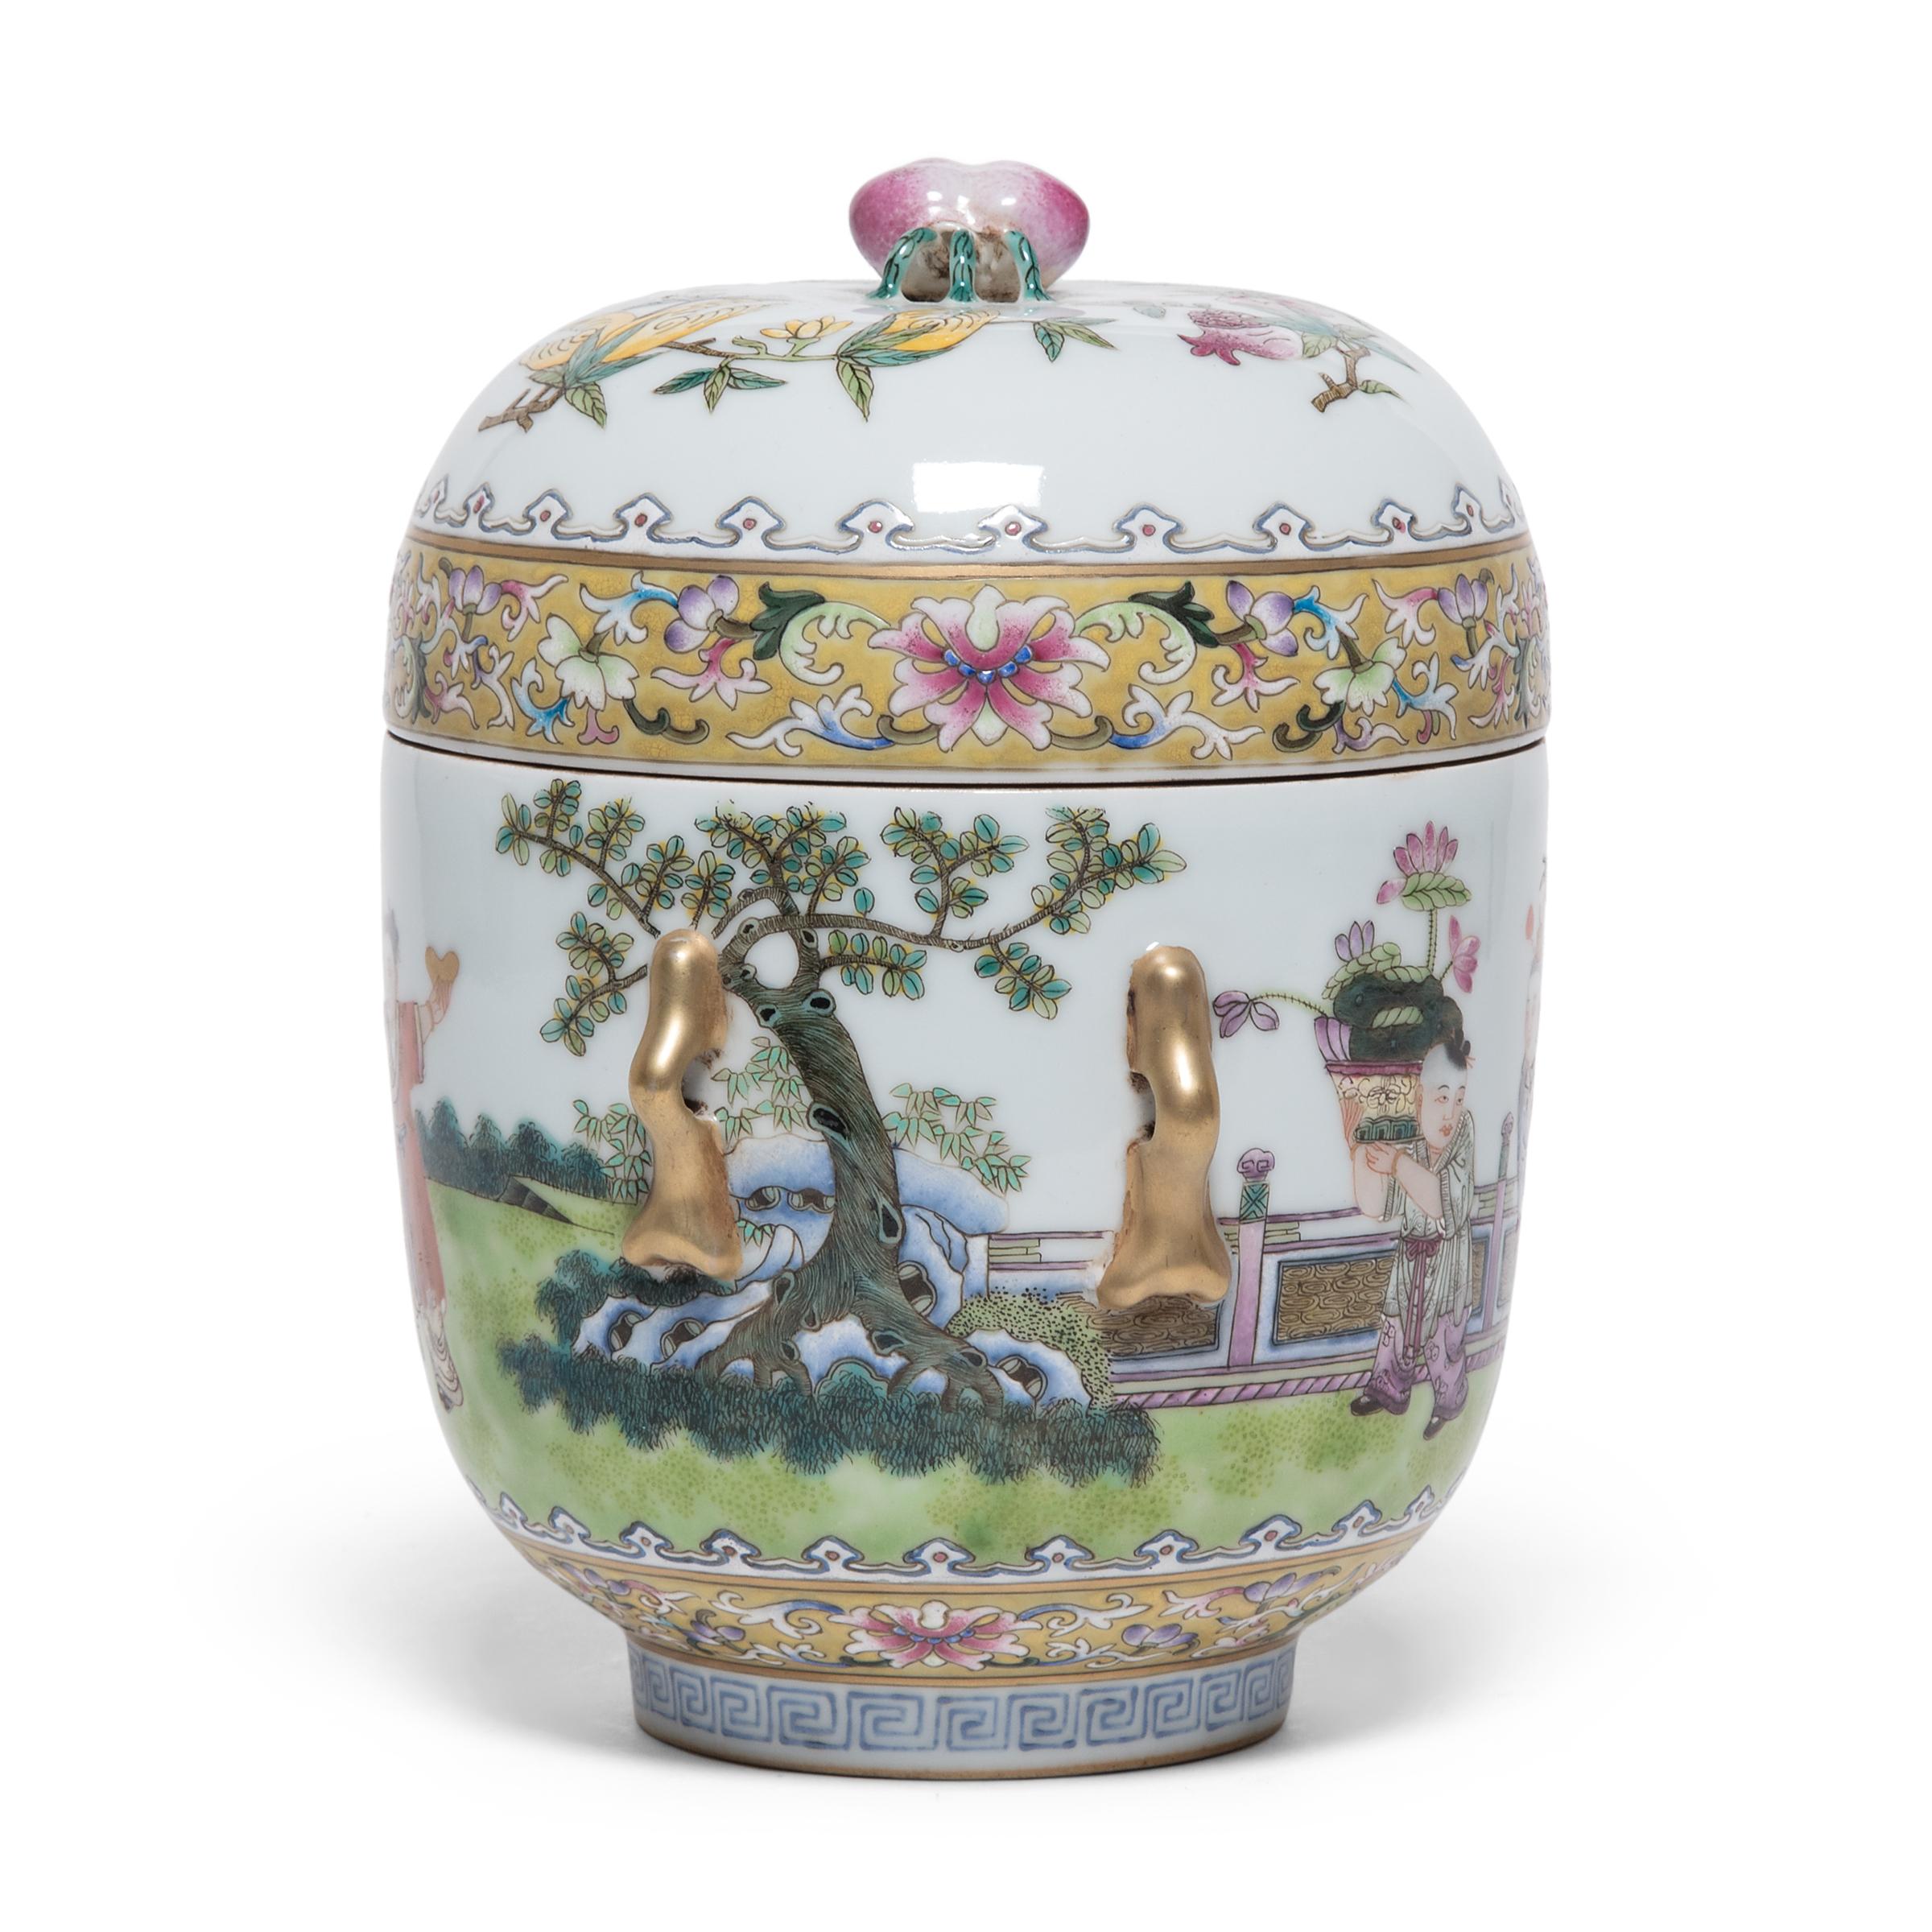 Qing Pair of Chinese Famille Rose Jars with Boys at Play, c. 1900